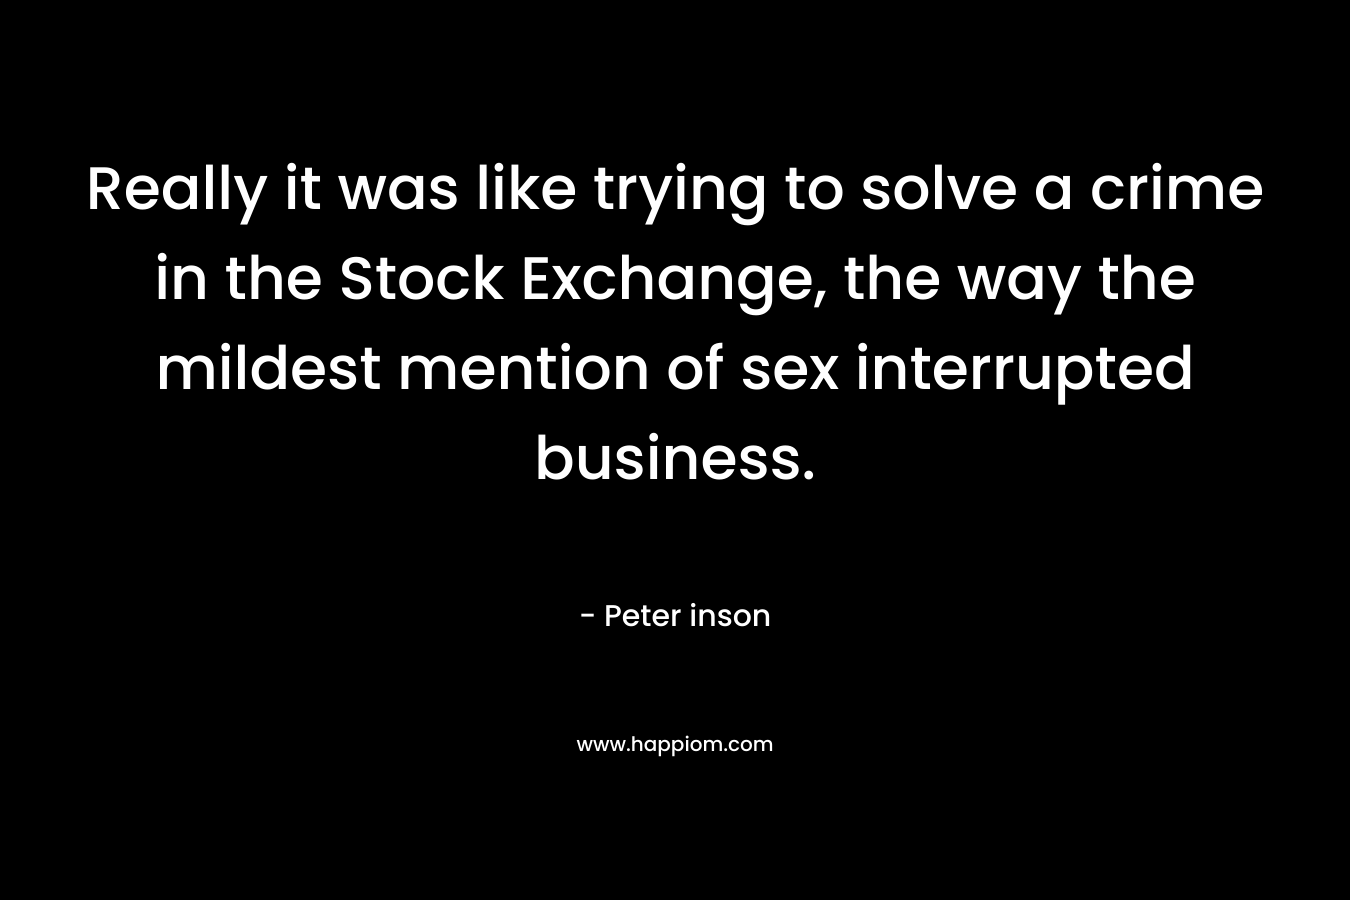 Really it was like trying to solve a crime in the Stock Exchange, the way the mildest mention of sex interrupted business. – Peter inson